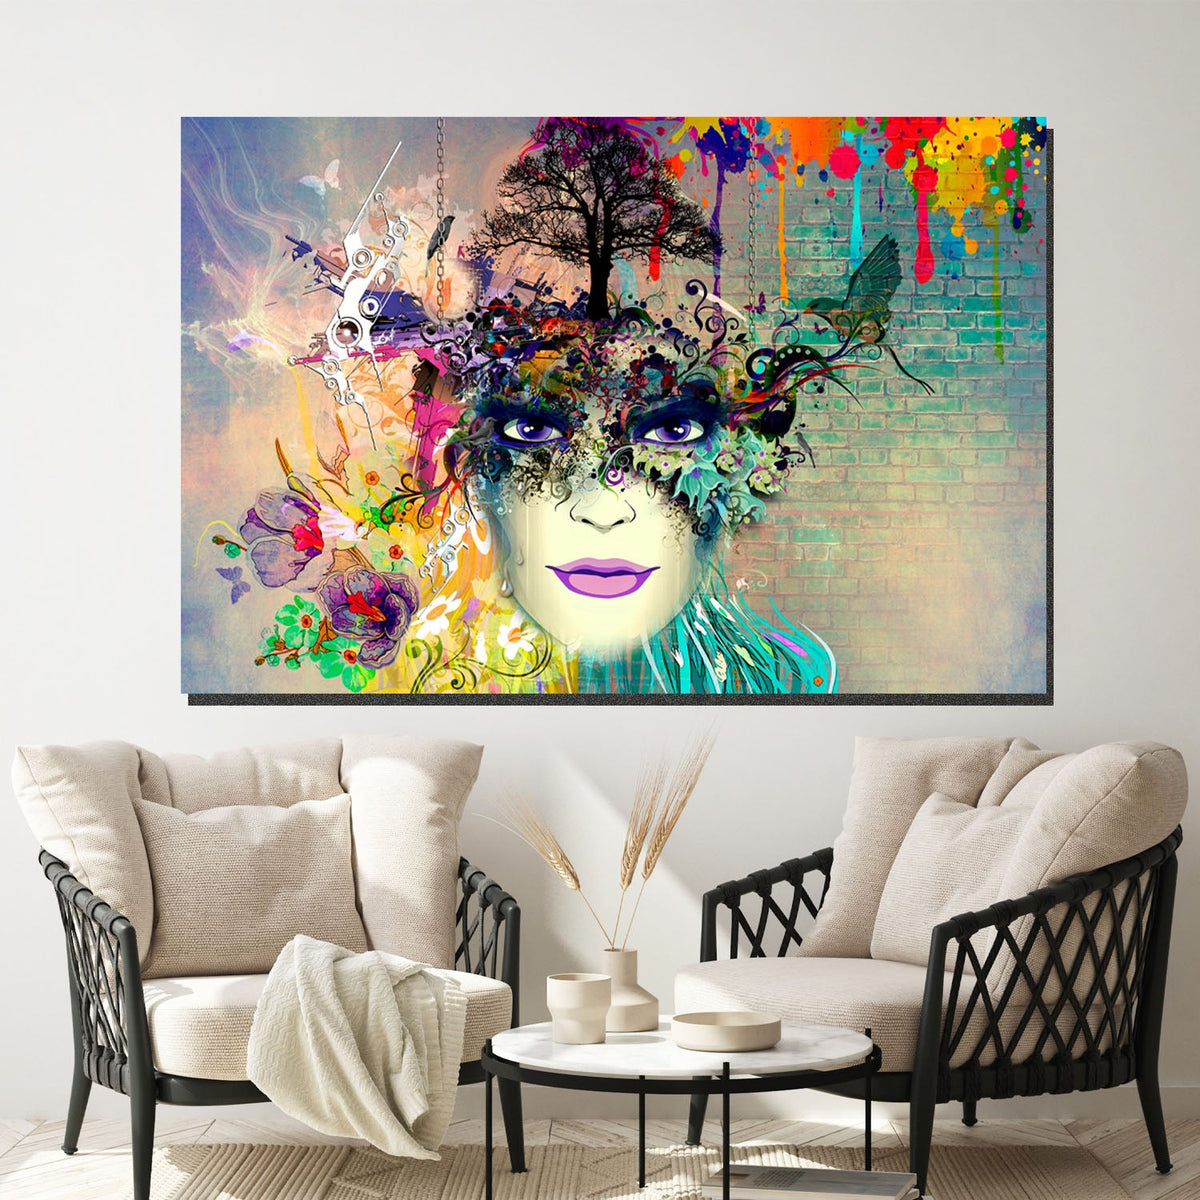 https://cdn.shopify.com/s/files/1/0387/9986/8044/products/AbstractPortraitofaWomanCanvasArtPrintStretched-4.jpg